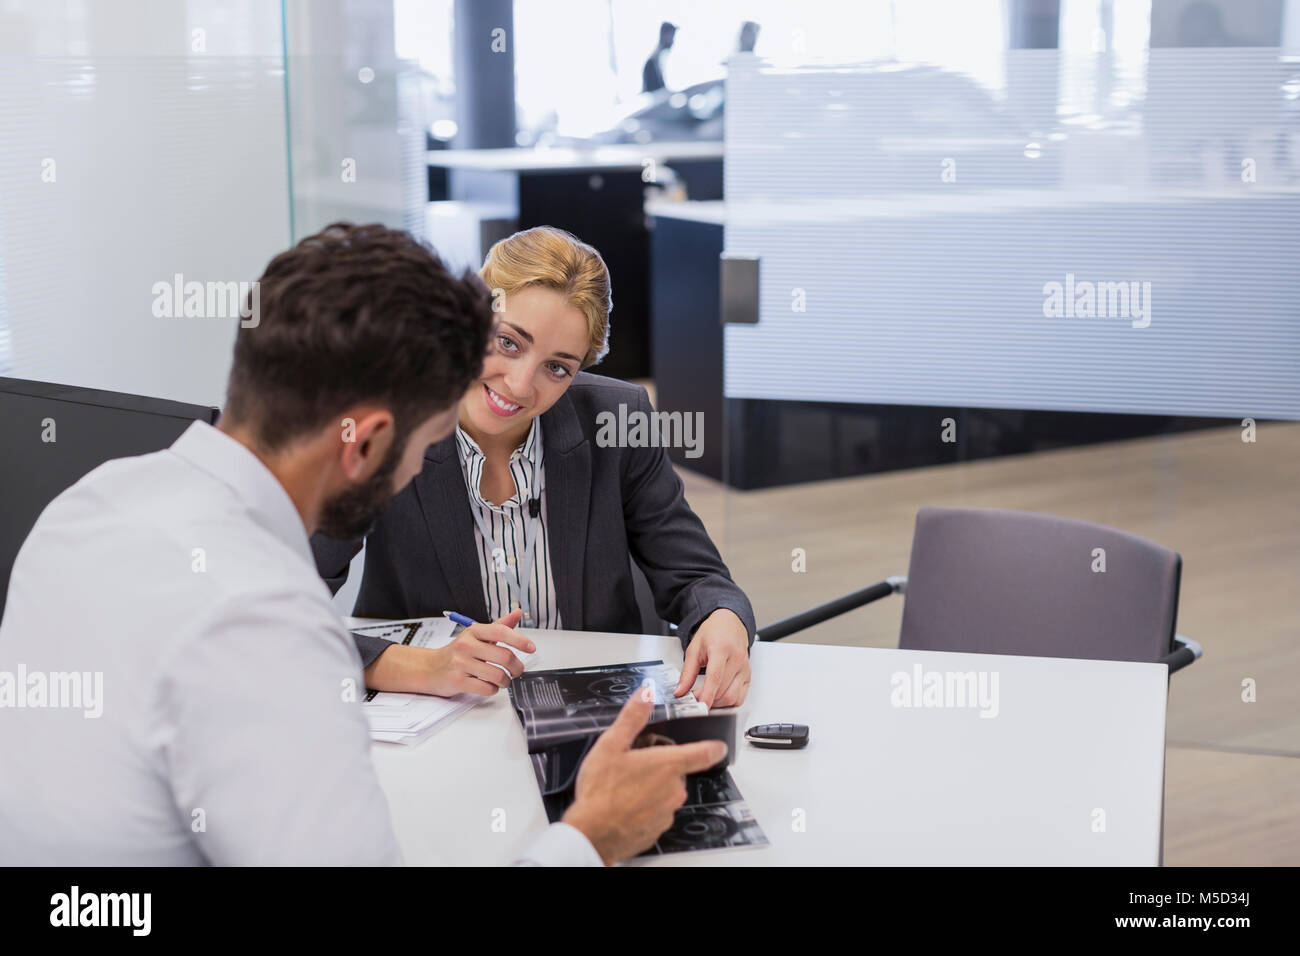 Smiling car saleswoman showing brochure to male customer in car dealership office Stock Photo